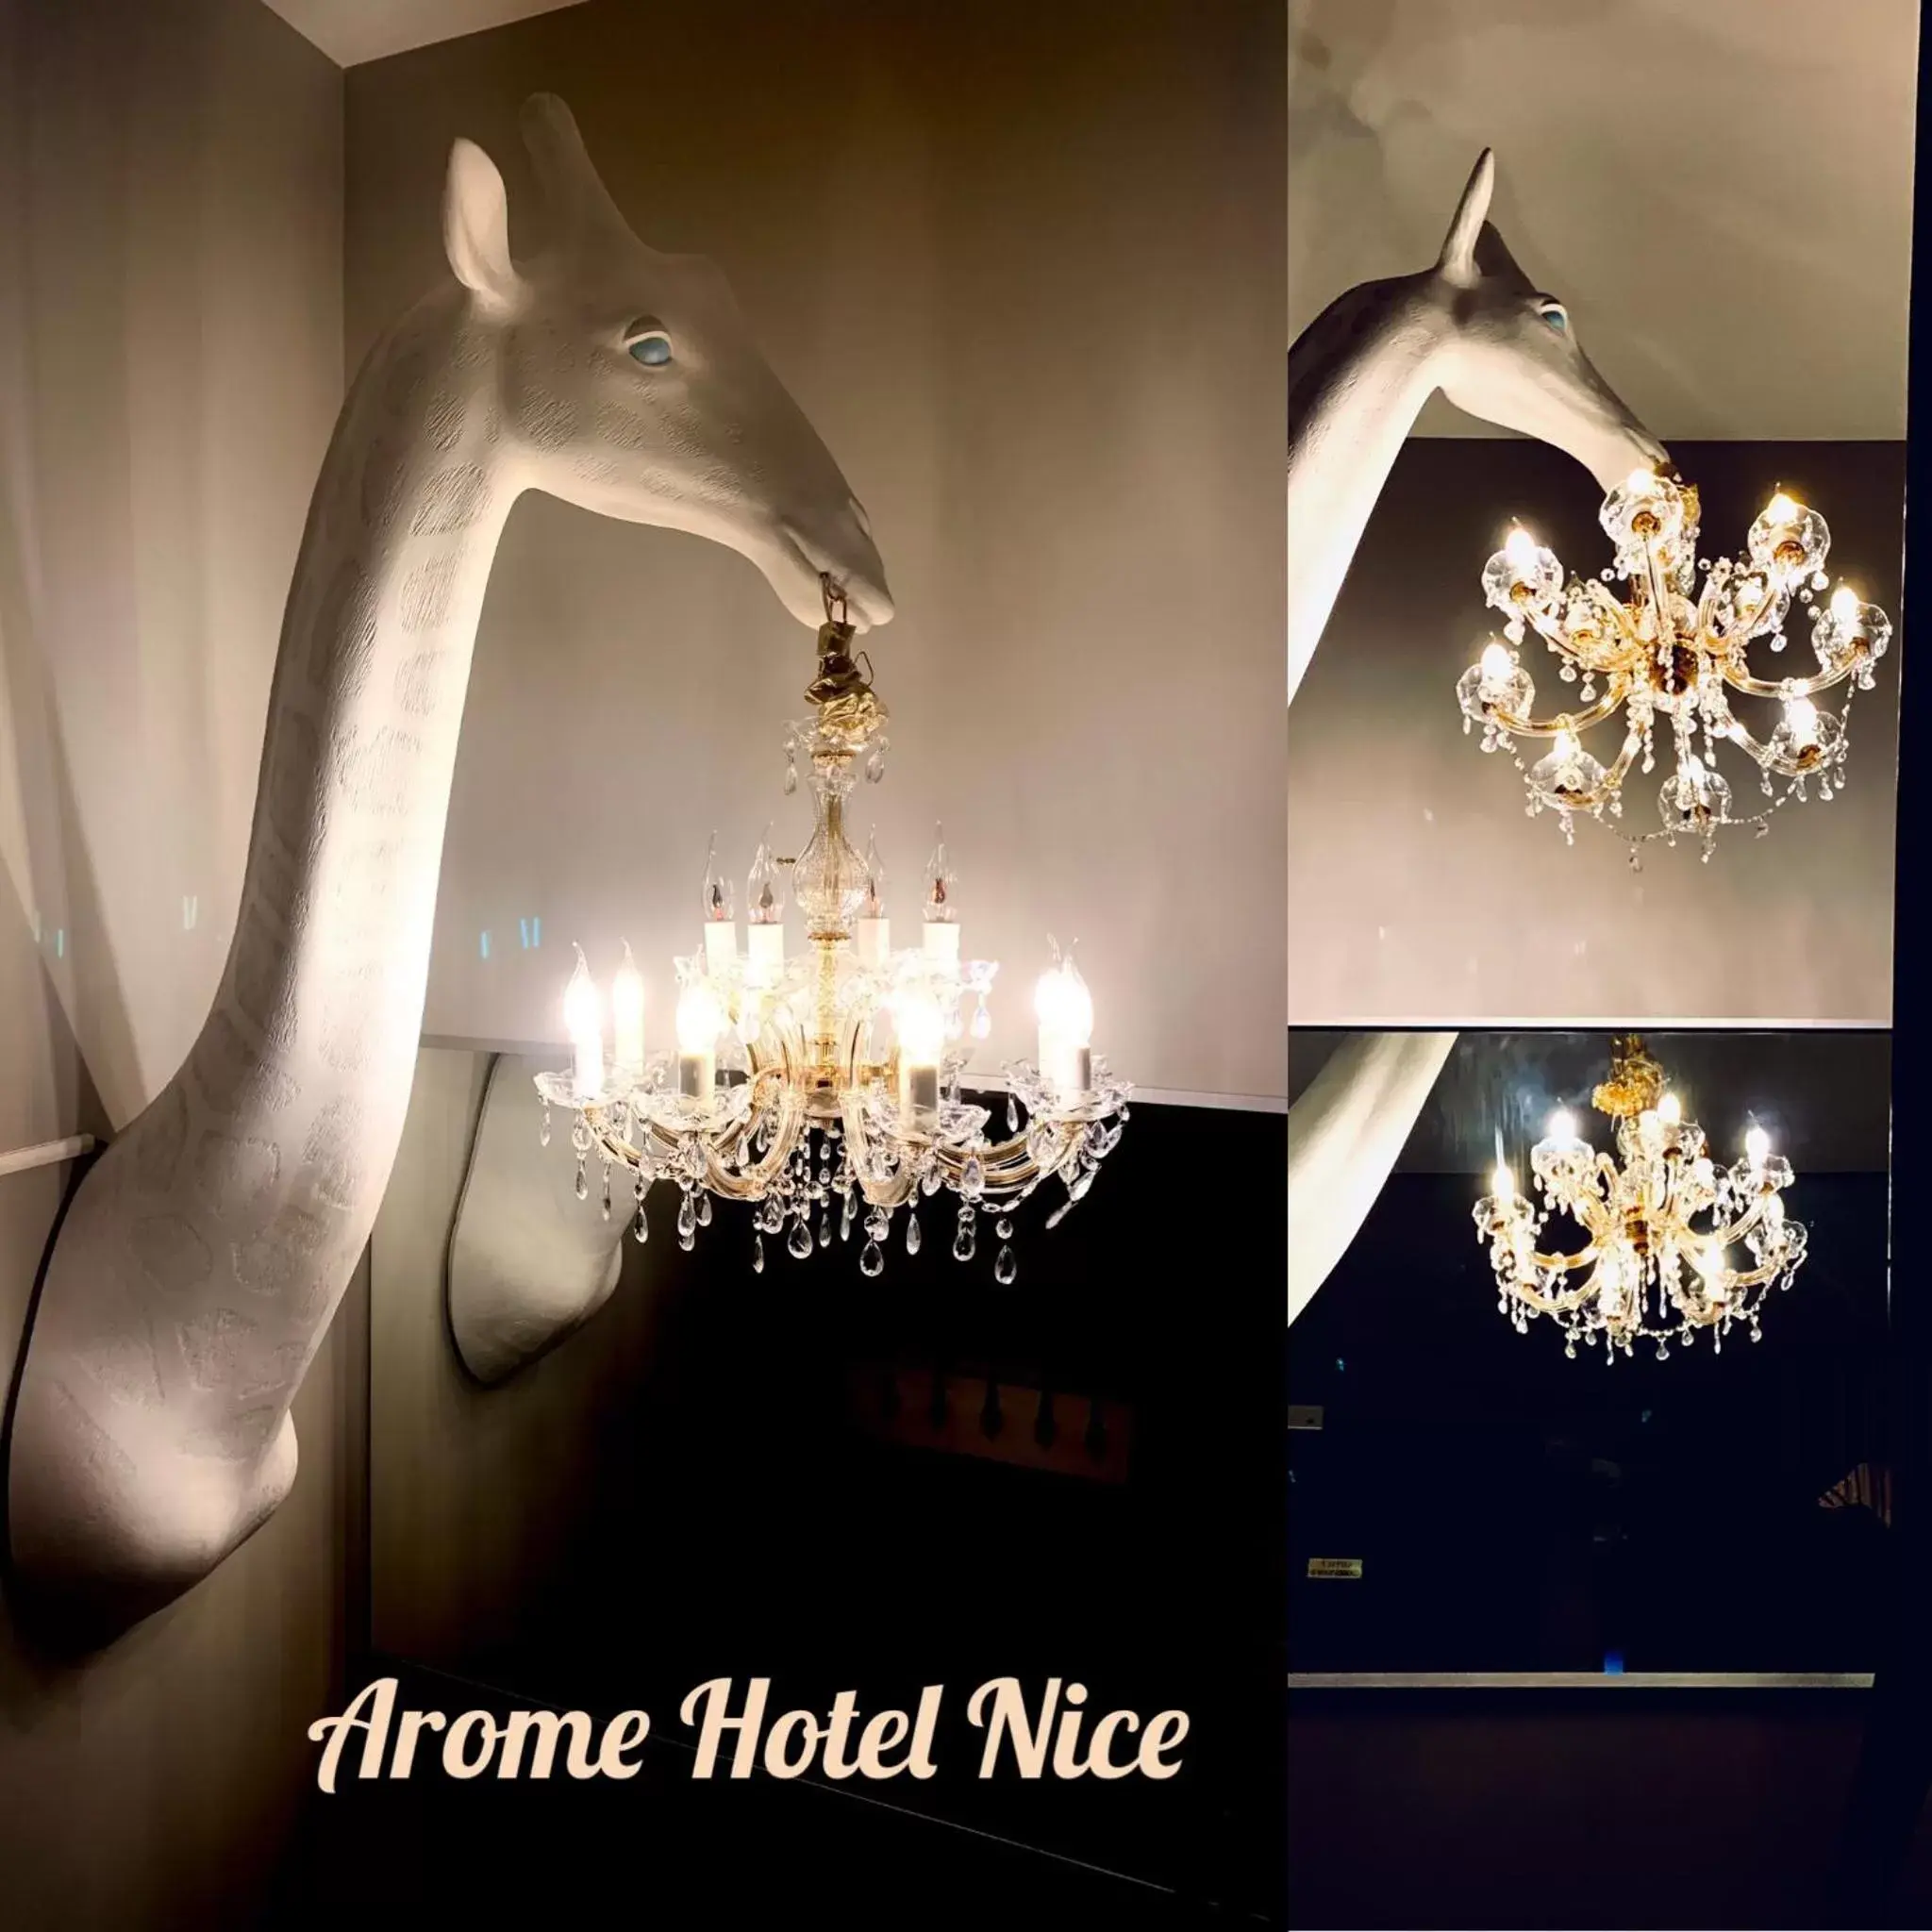 Decorative detail in Arome Hotel